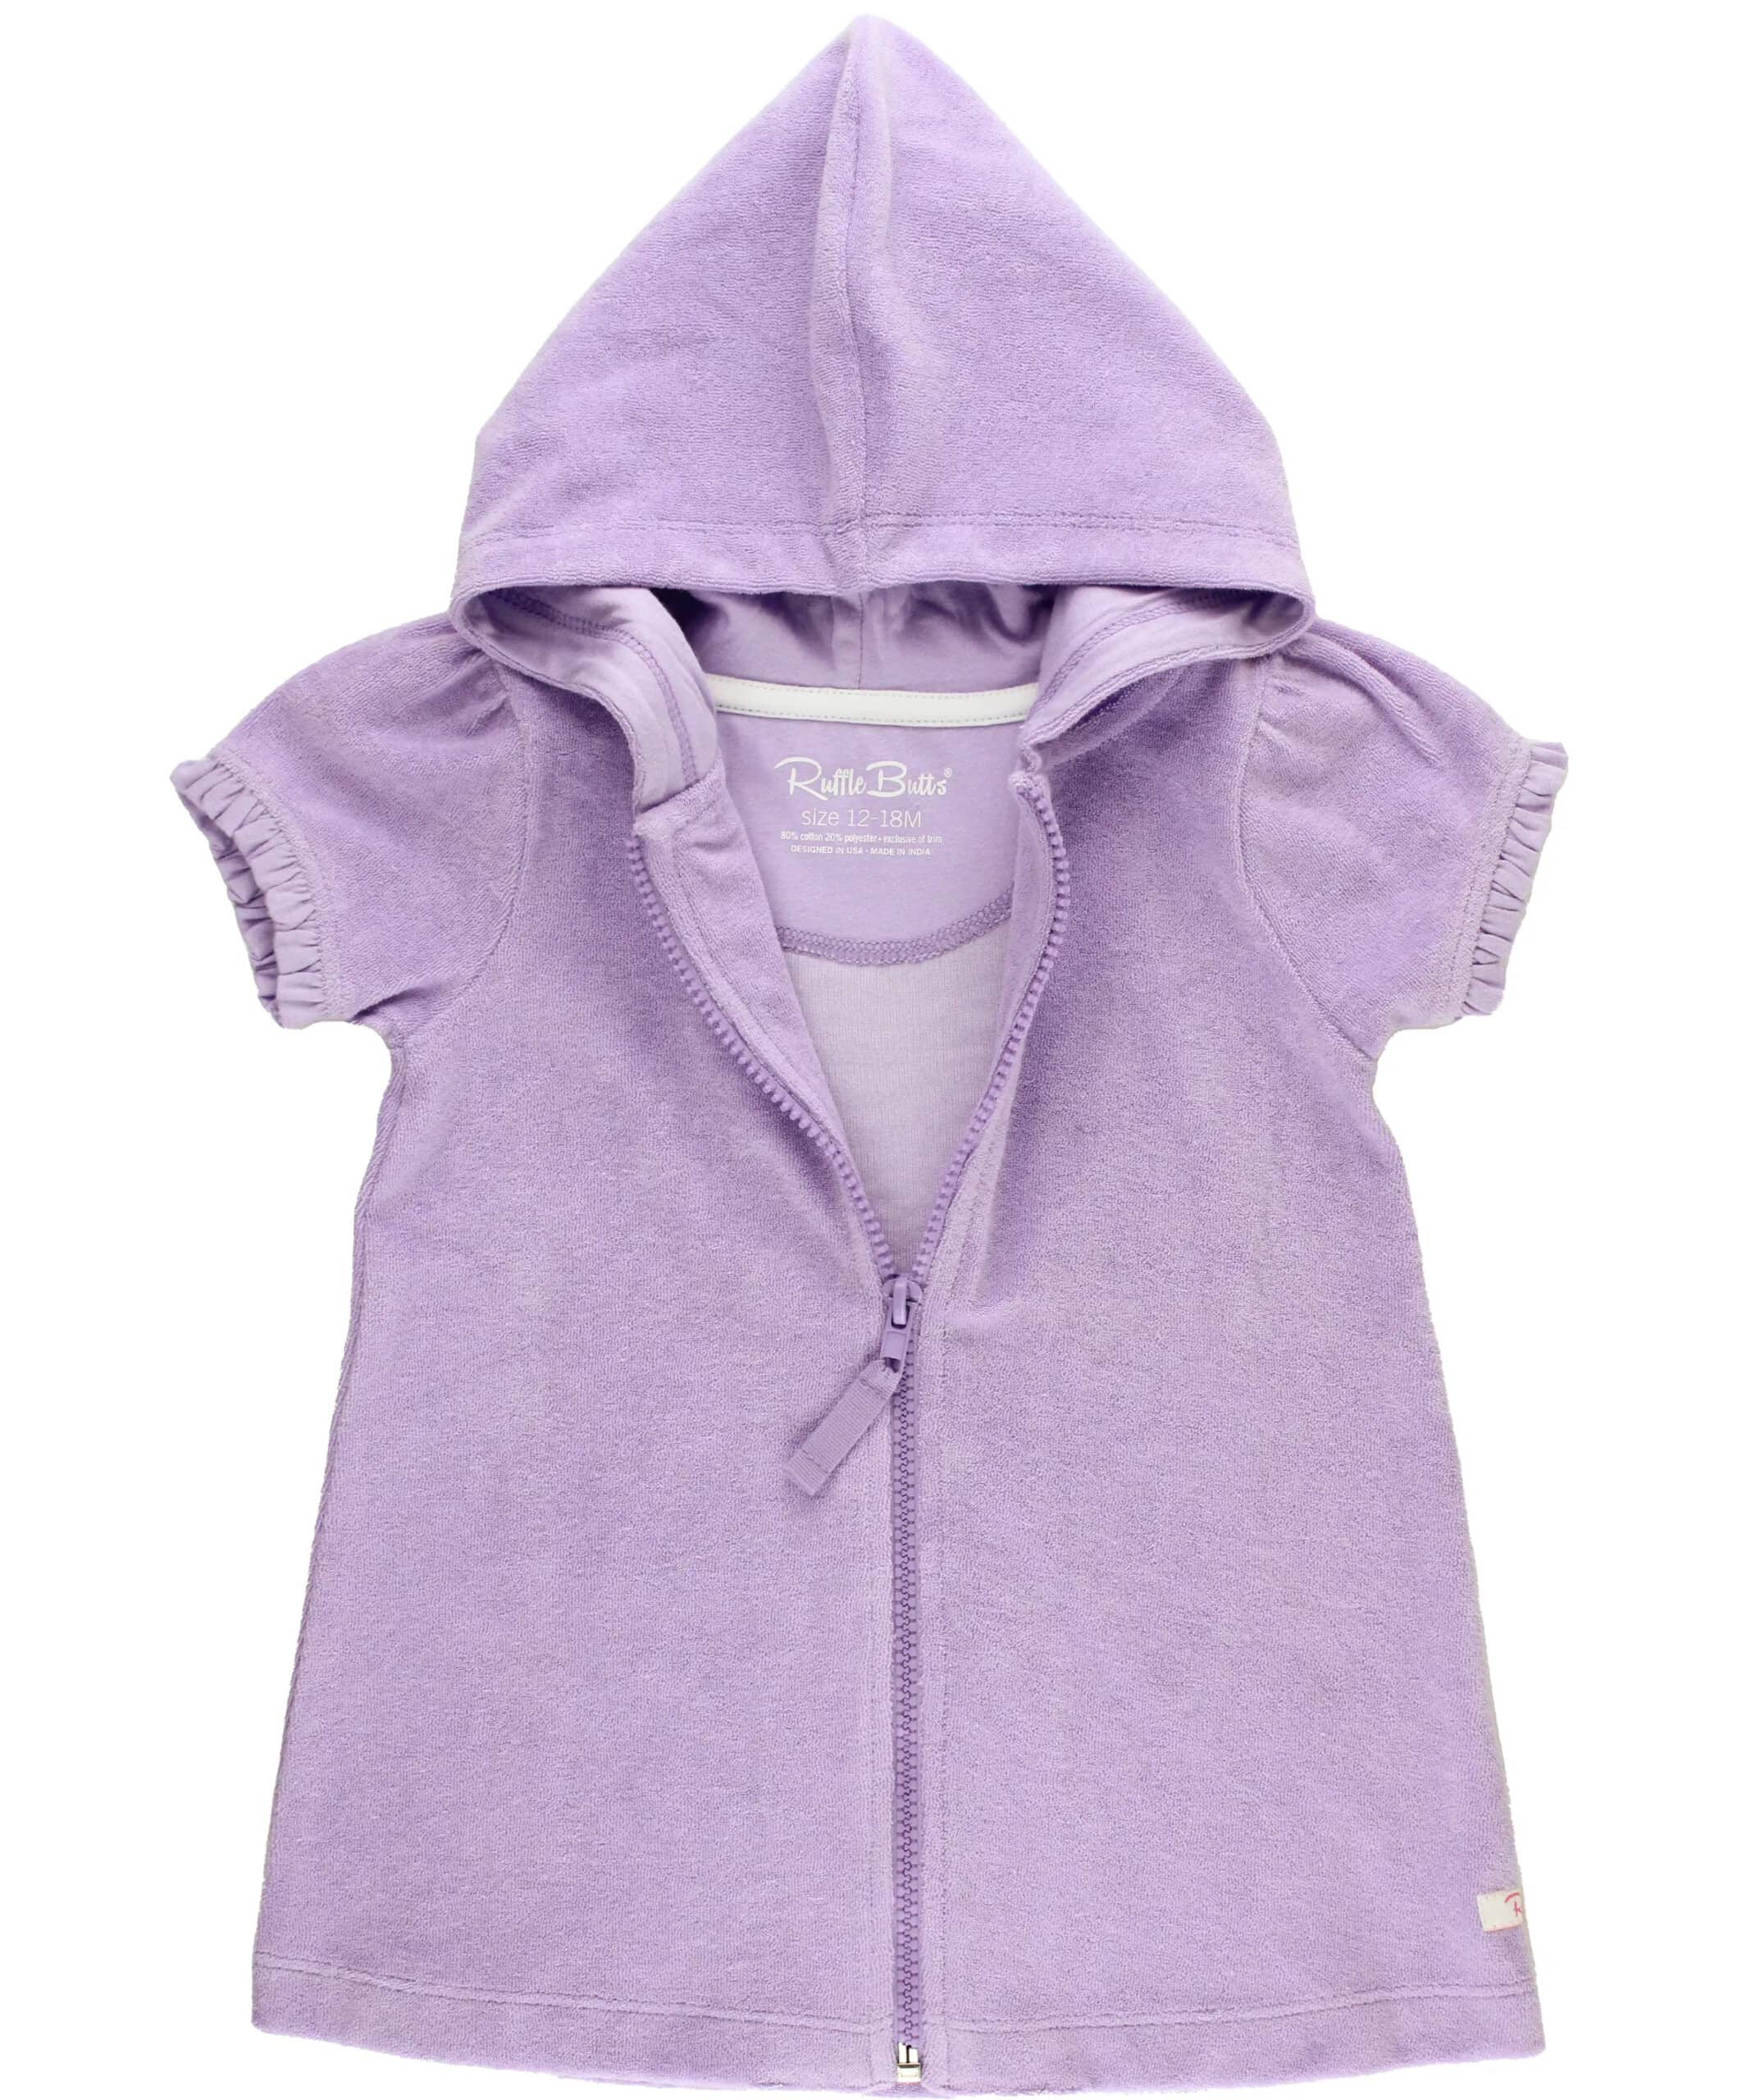 Purple terry zip-up cover-up